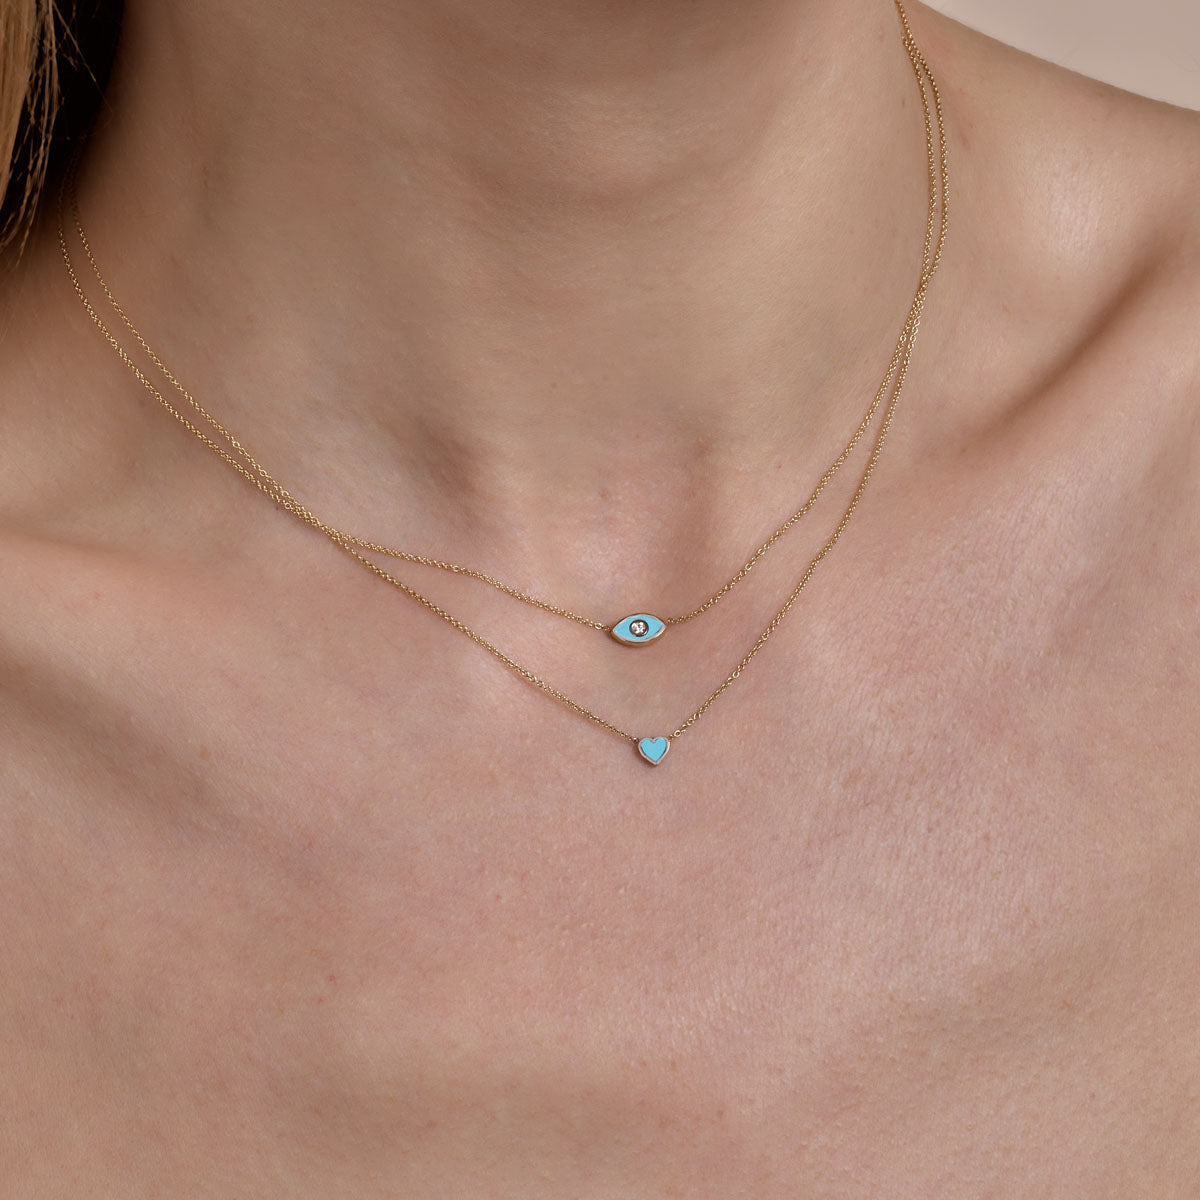 gold turquoise evil eye necklace and gold turquoise heart necklace on models neck_206269bc 2df5 4739 86bd ff937fc6868c